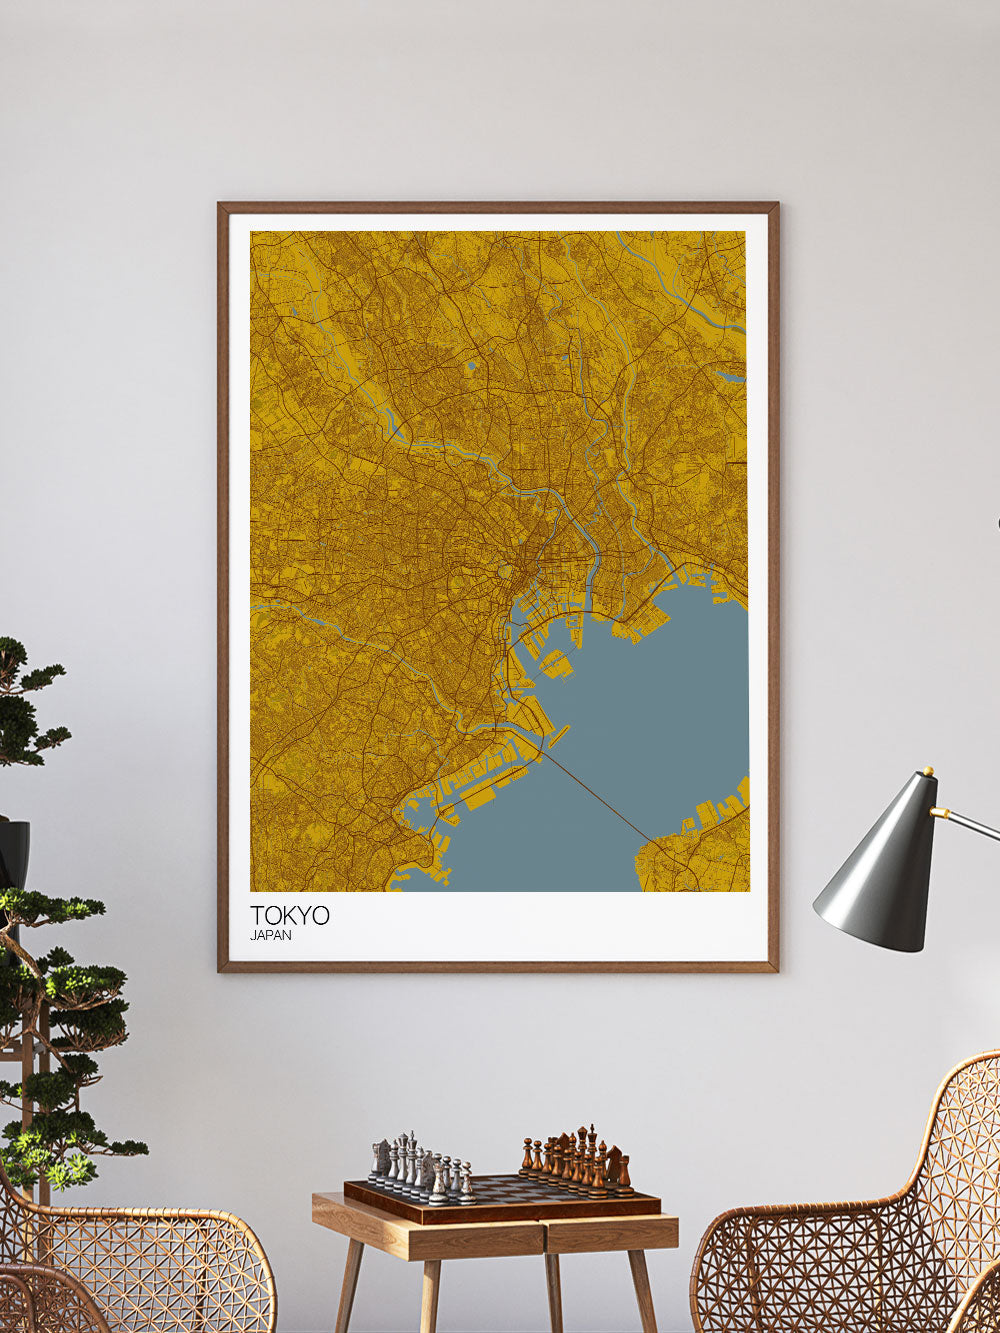 Tokyo City Map Print in a frame on a wall